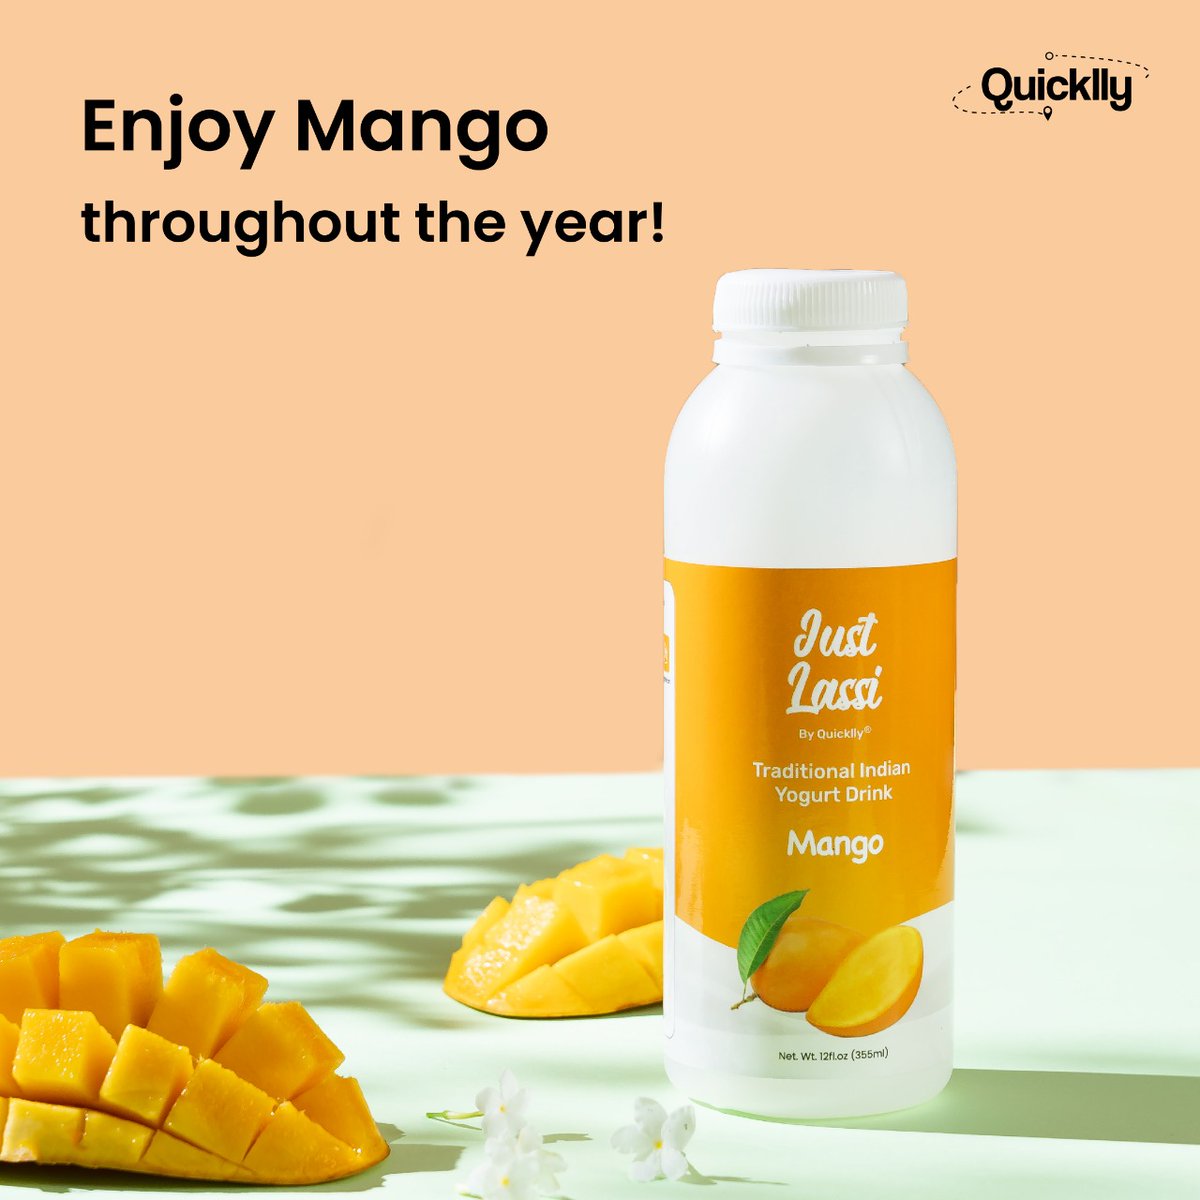 Treat yourself to some desi style Mango-flavored lassi. #QuickllyIt
Free Nationwide Delivery
quicklly.com/lassi-near-me
#quicklly_official #Quicklly
#mangolassi #indianfood #indiangrocery #lassi